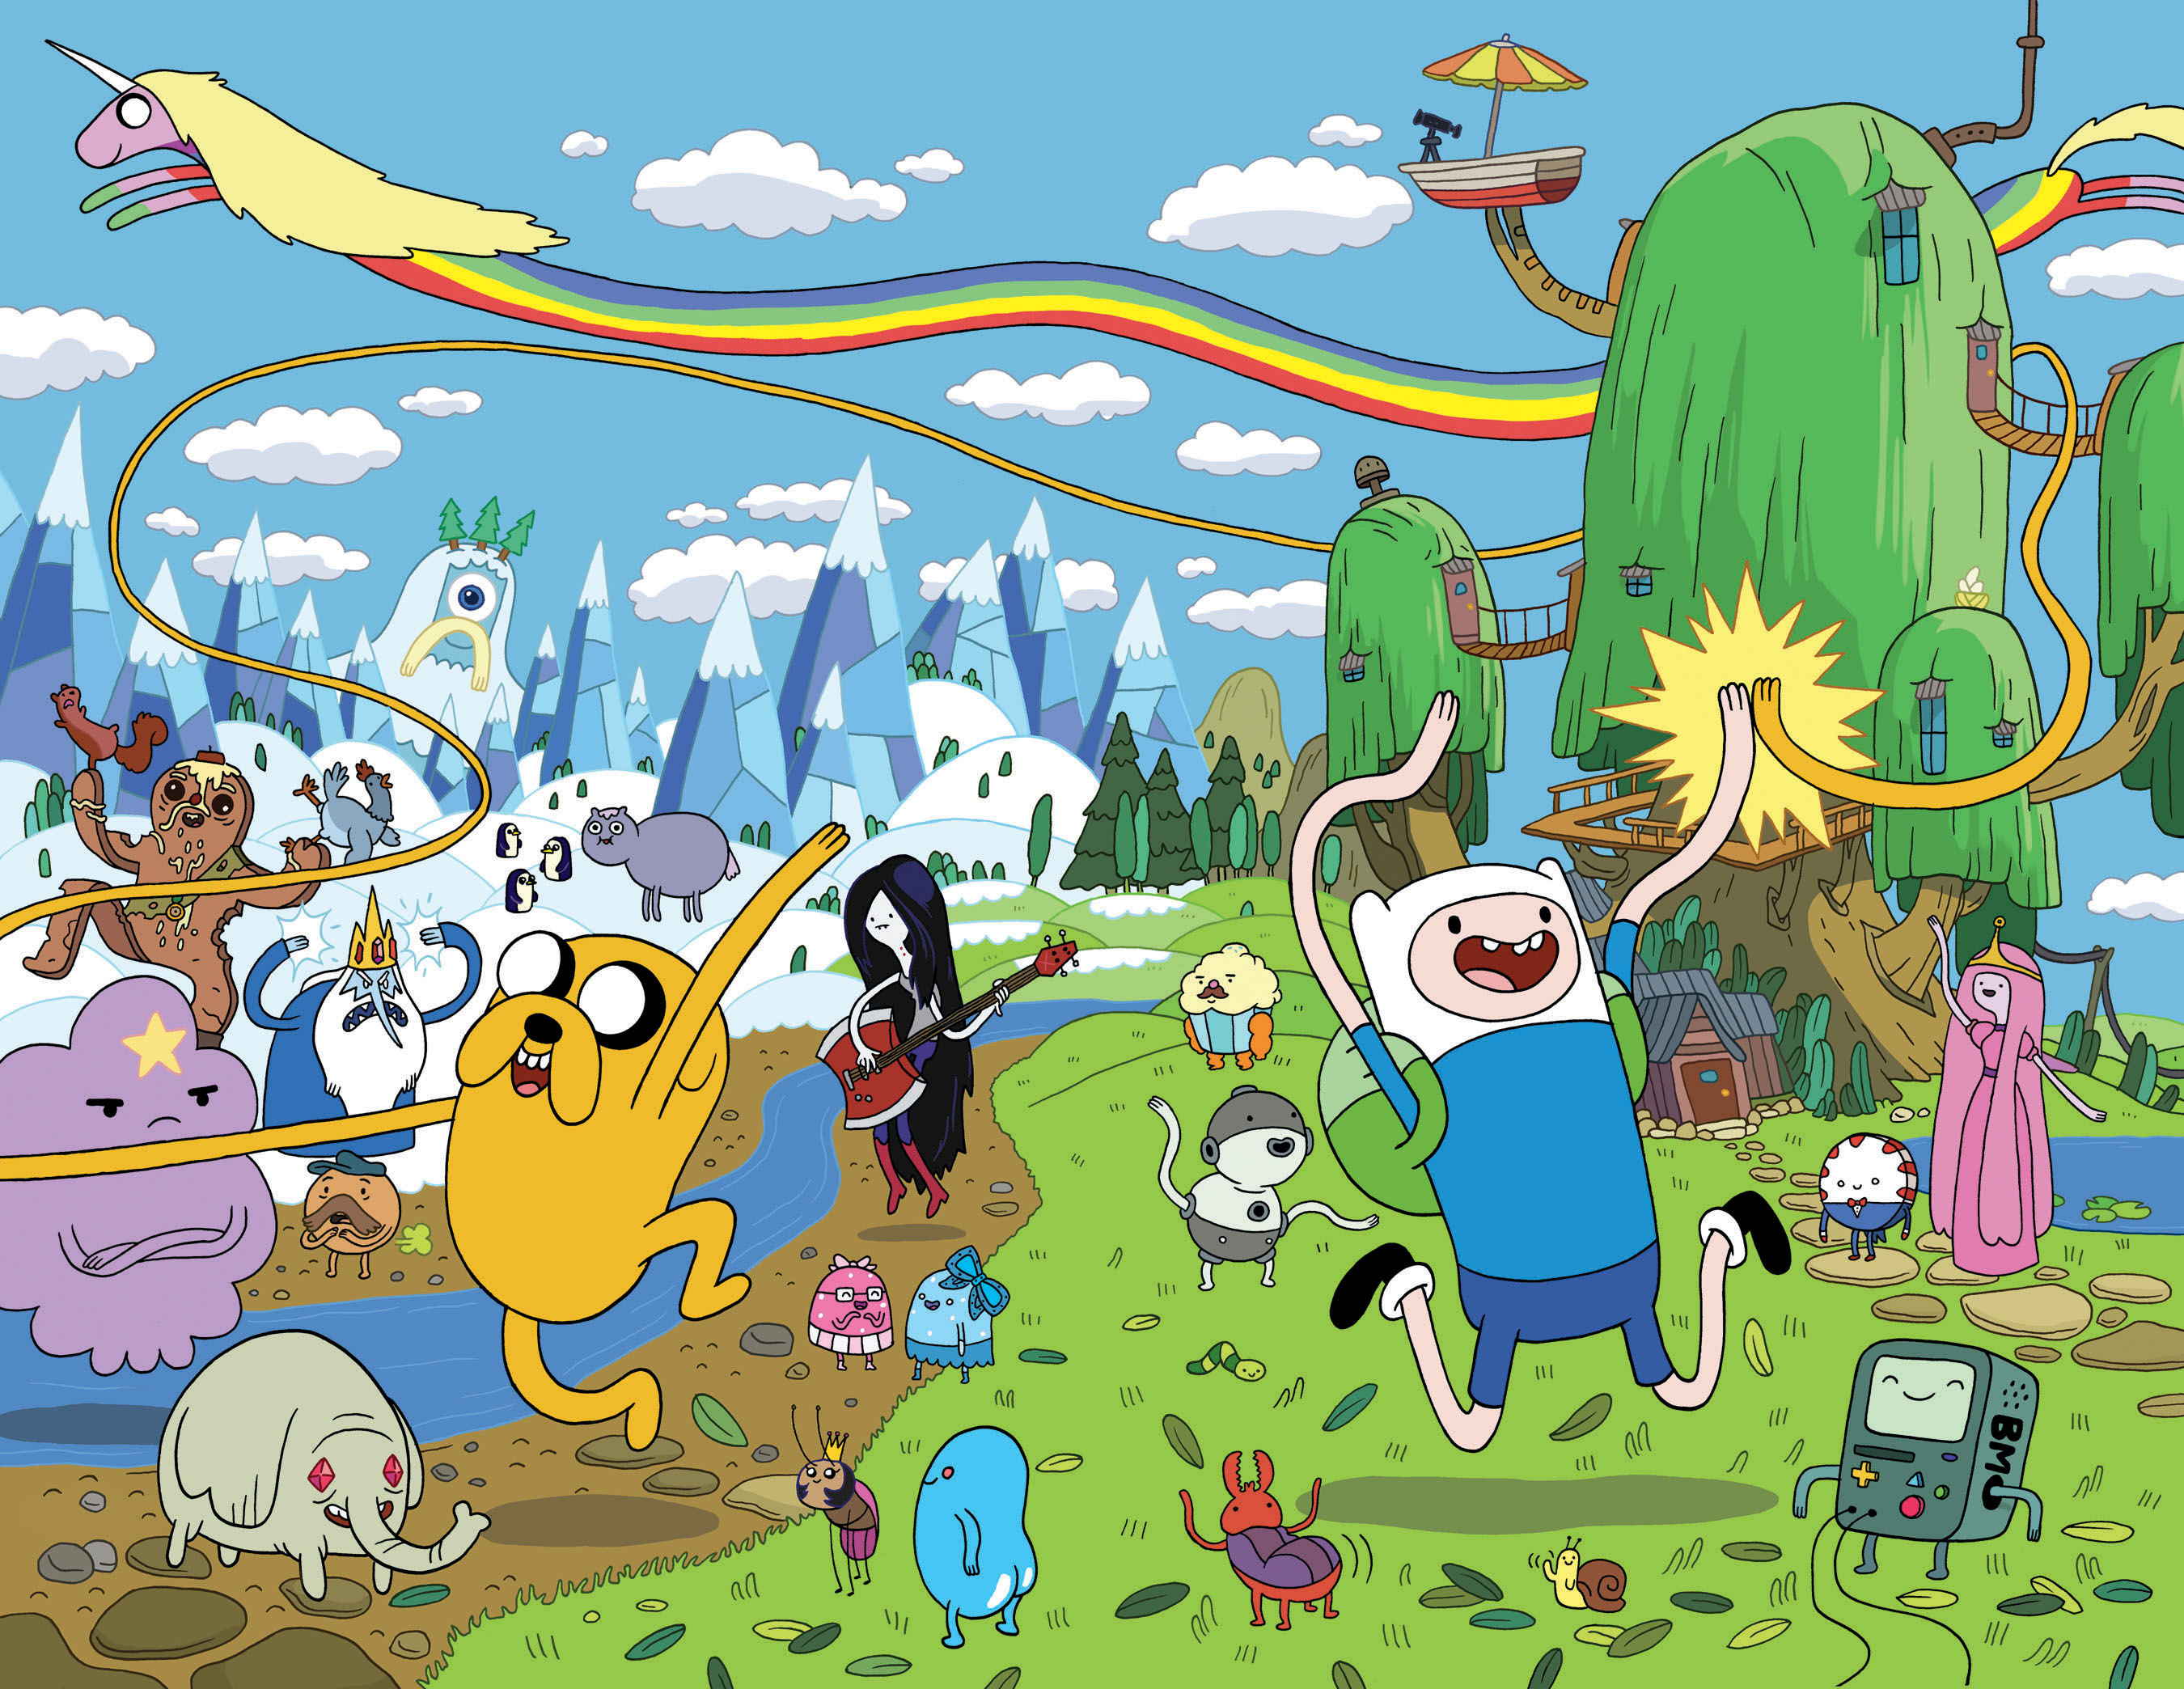 SDCC '15: Cartoon Network and Adult Swim announce panel line-up